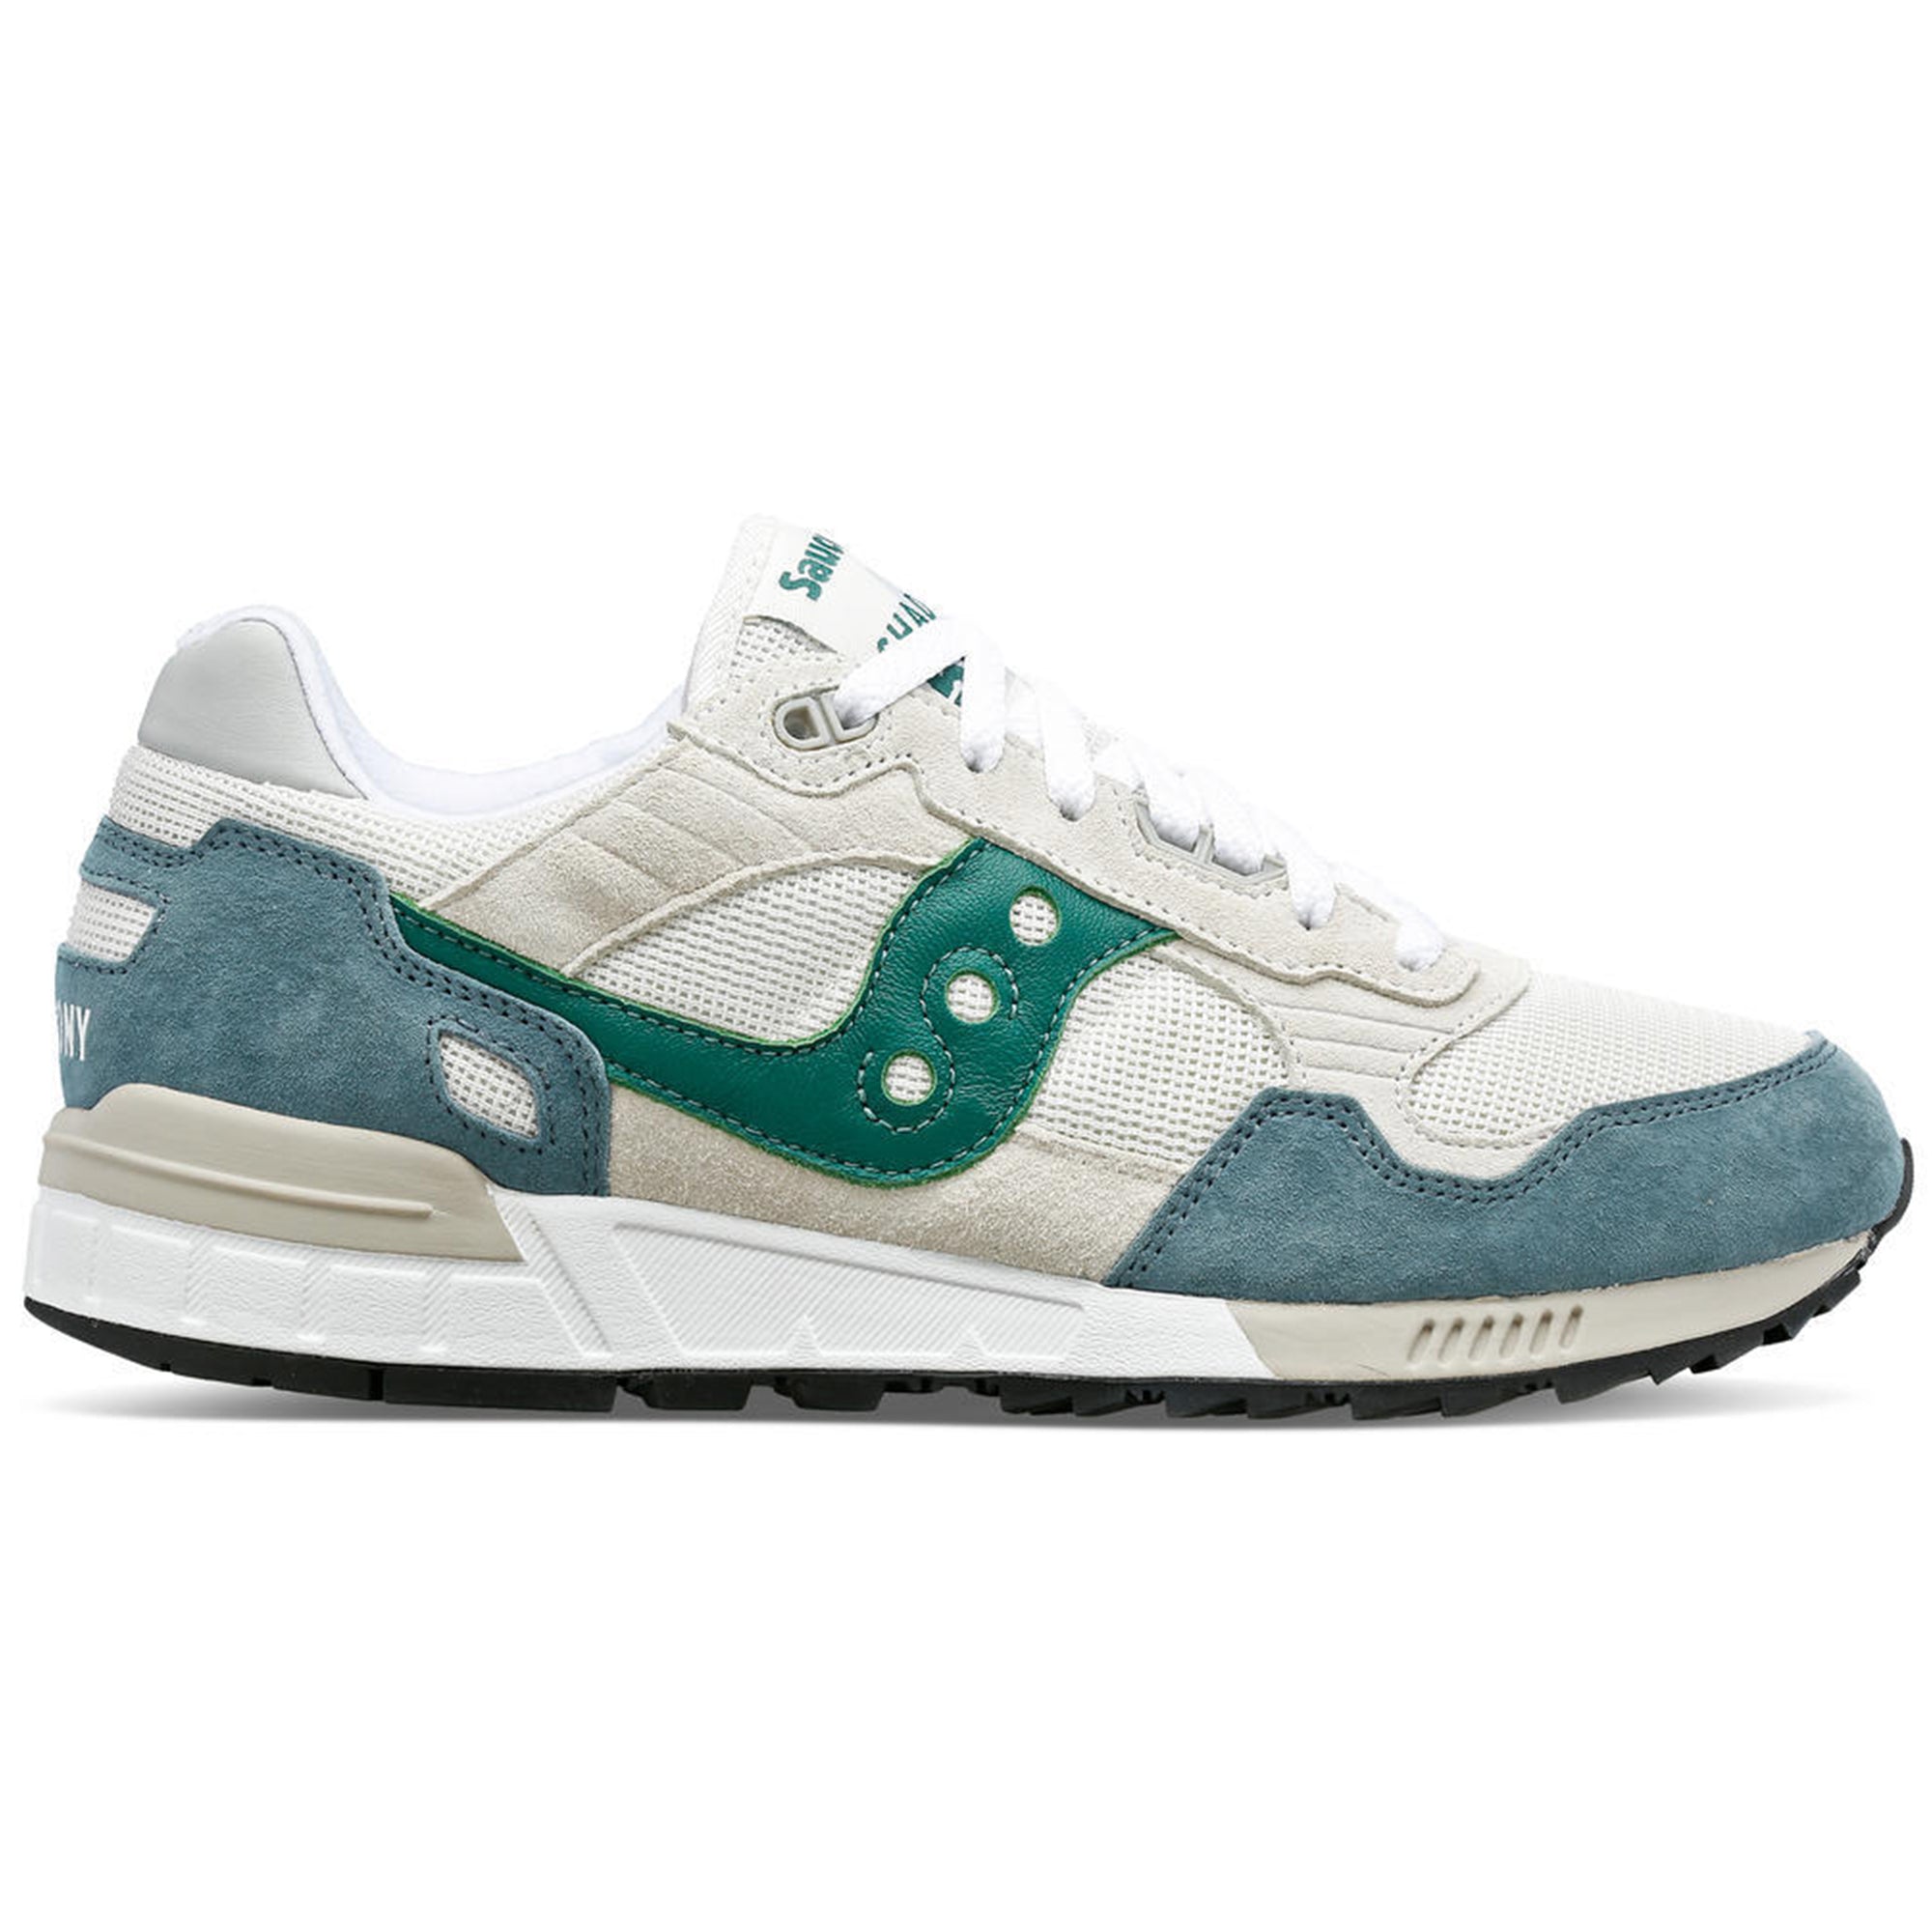 Saucony Shadow 5000 Trainers - White/Grey/Green